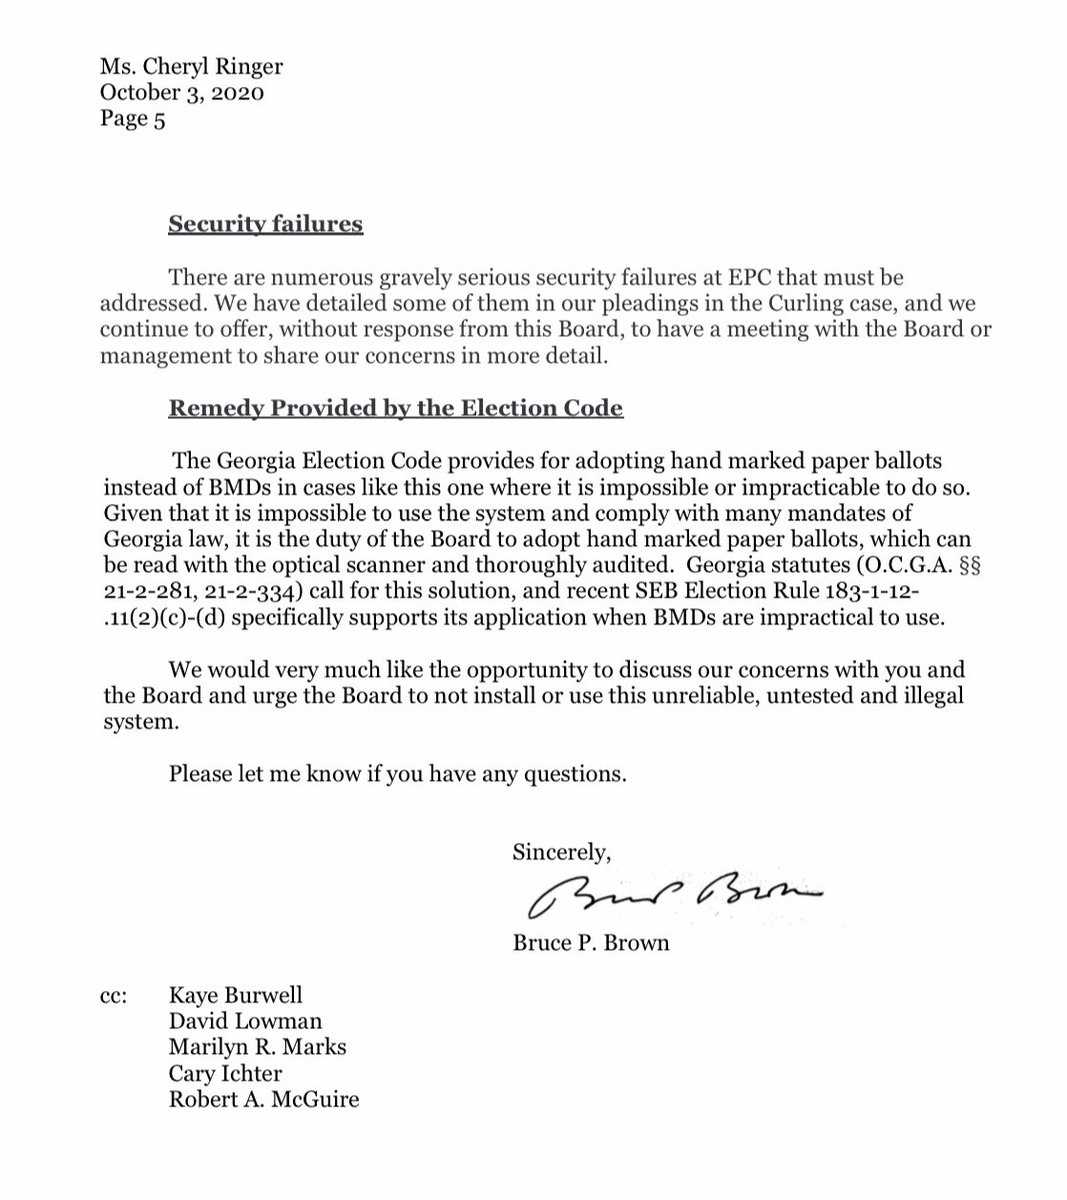 4. The remainder of Bruce Brown, Esq.’s letter. ALL counties affected, not just Fulton.—> Board members are more receptive to emails addressed specifically to them rather than group emails. You can write the same letter just send it to each member individually.